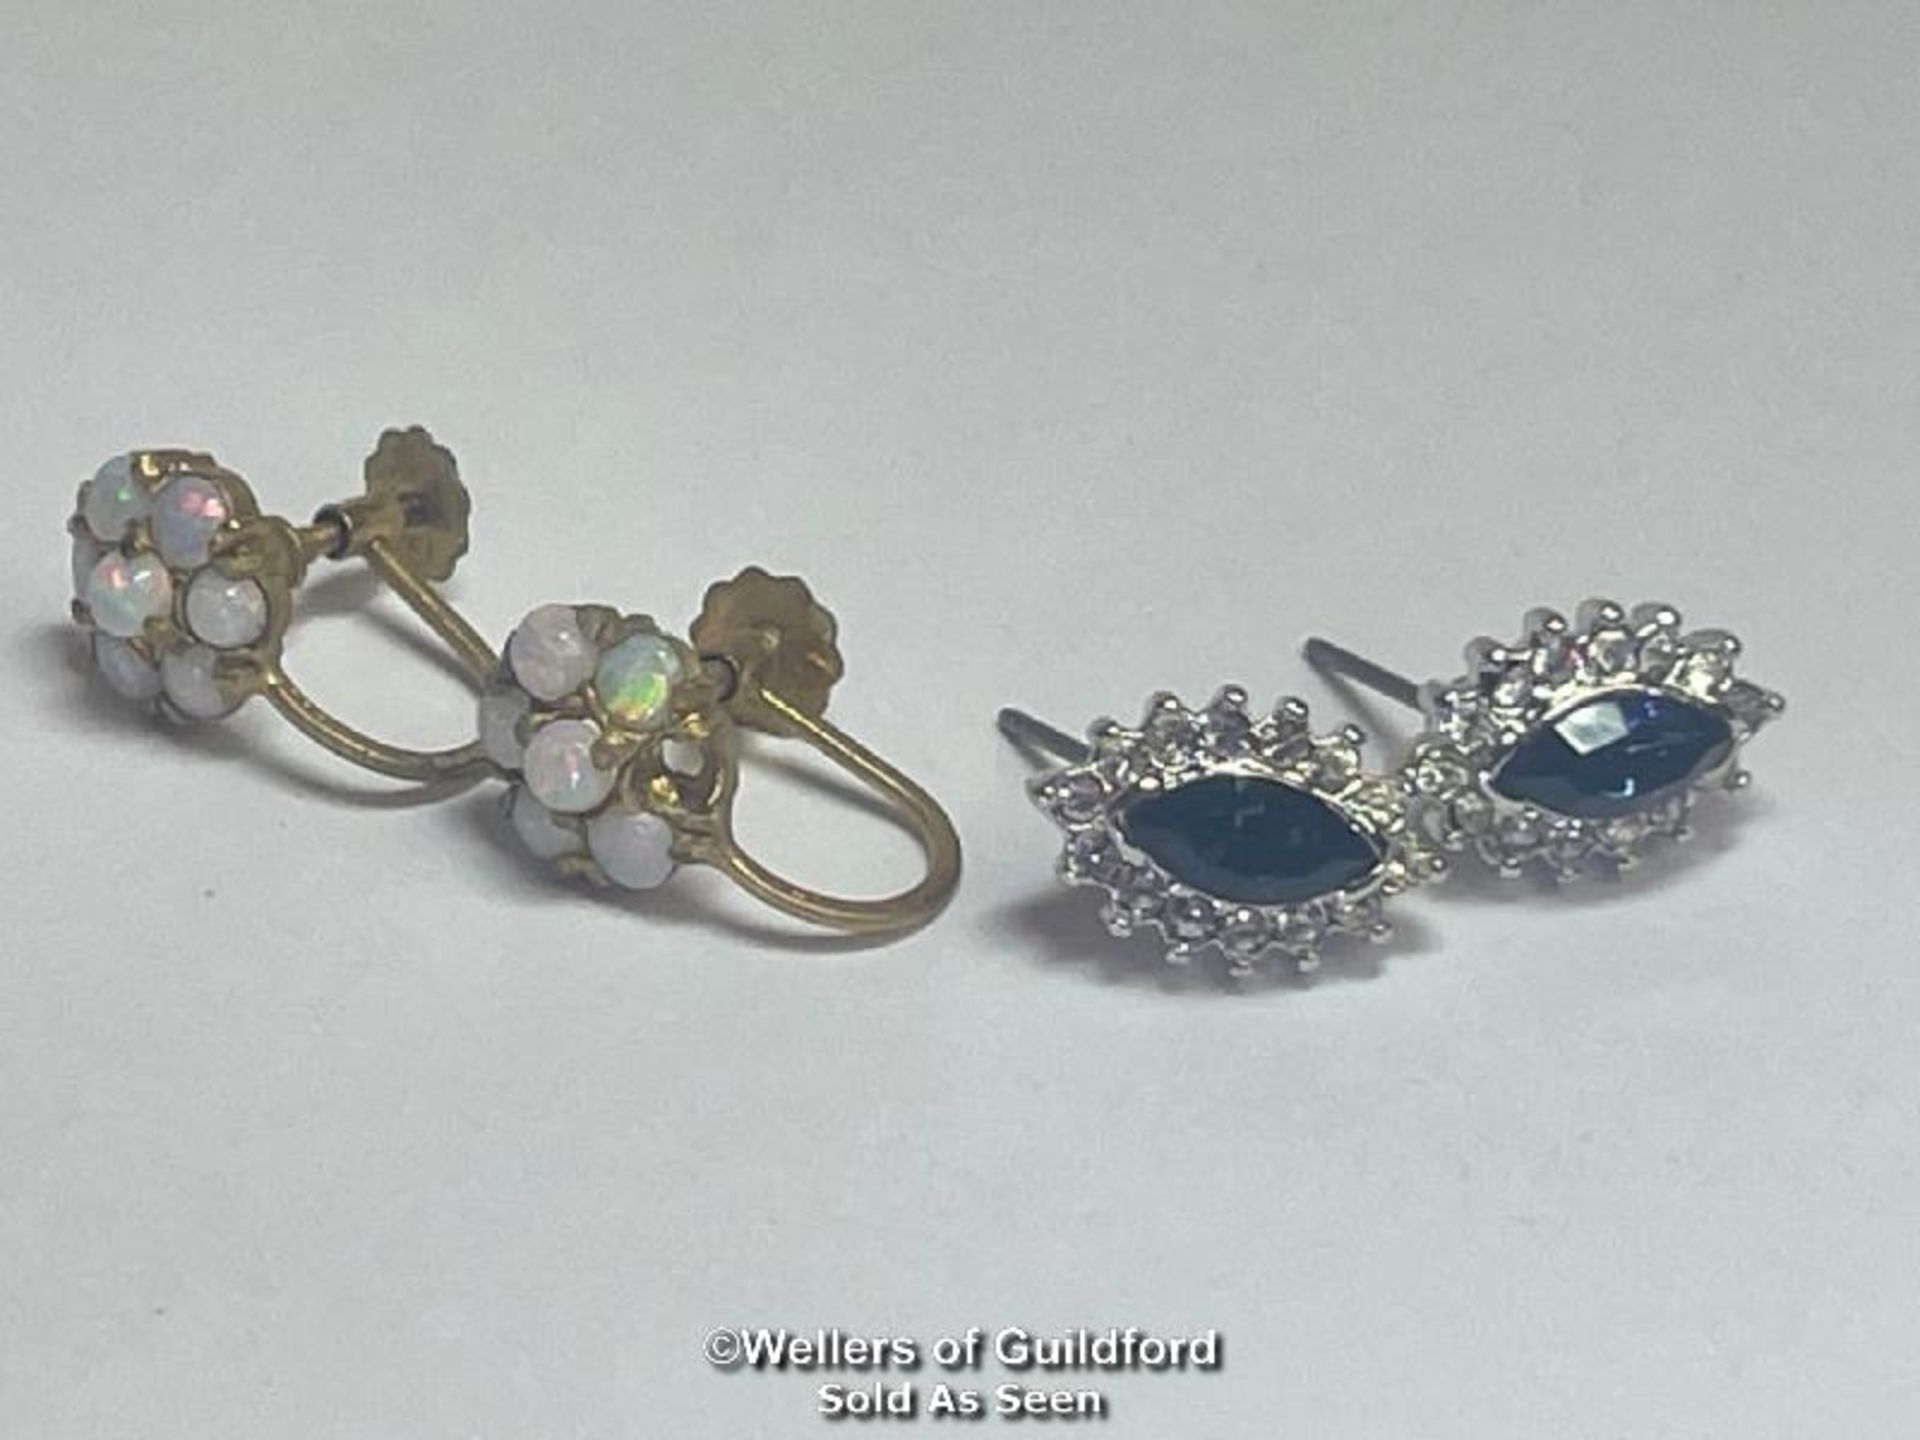 A pair of opal cluster earings in hallmarked 9ct gold with screw fittings and a pair of fashion